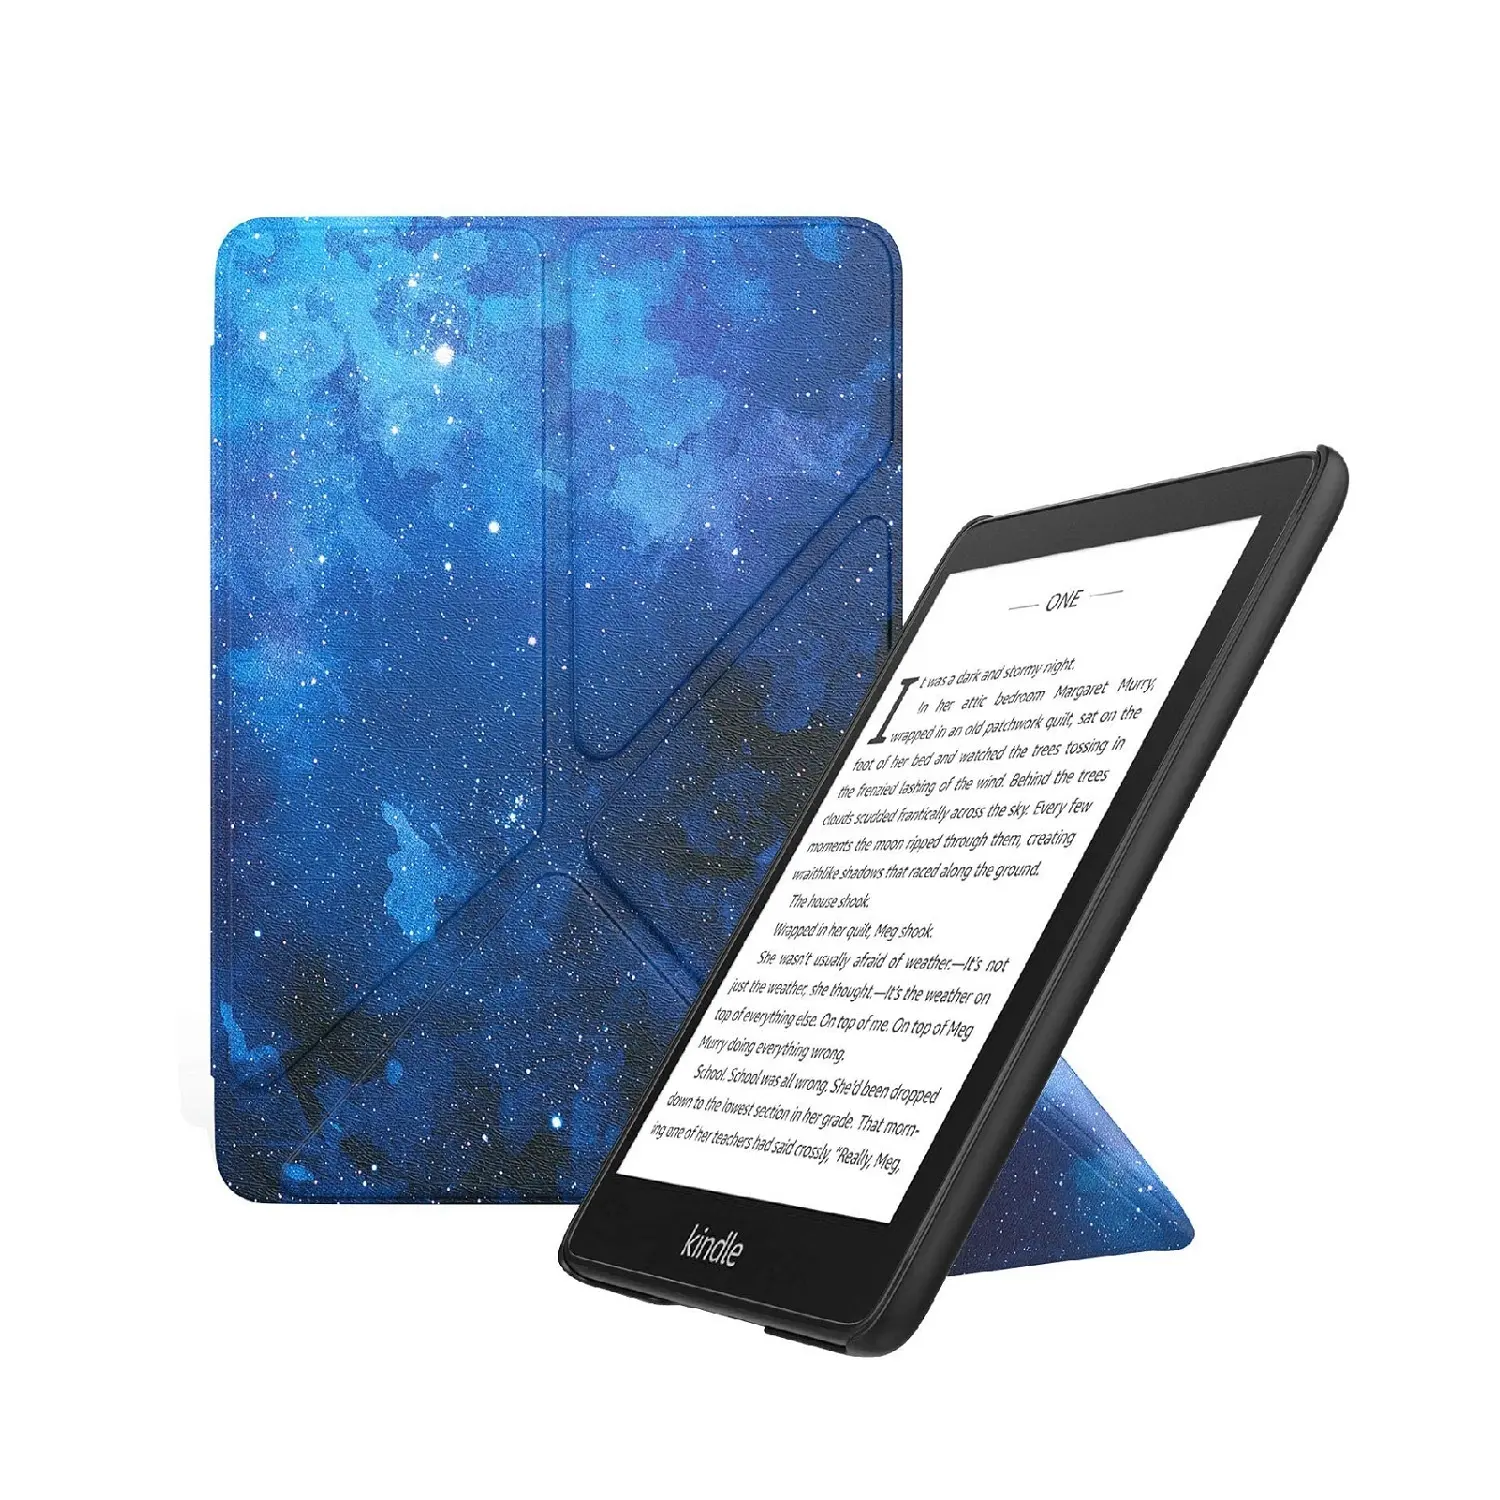 MoKo Smart Leather Standing Slim Shell Cover Case for Amazon Kindle Paperwhite (10th Generation, 2018 Releases)